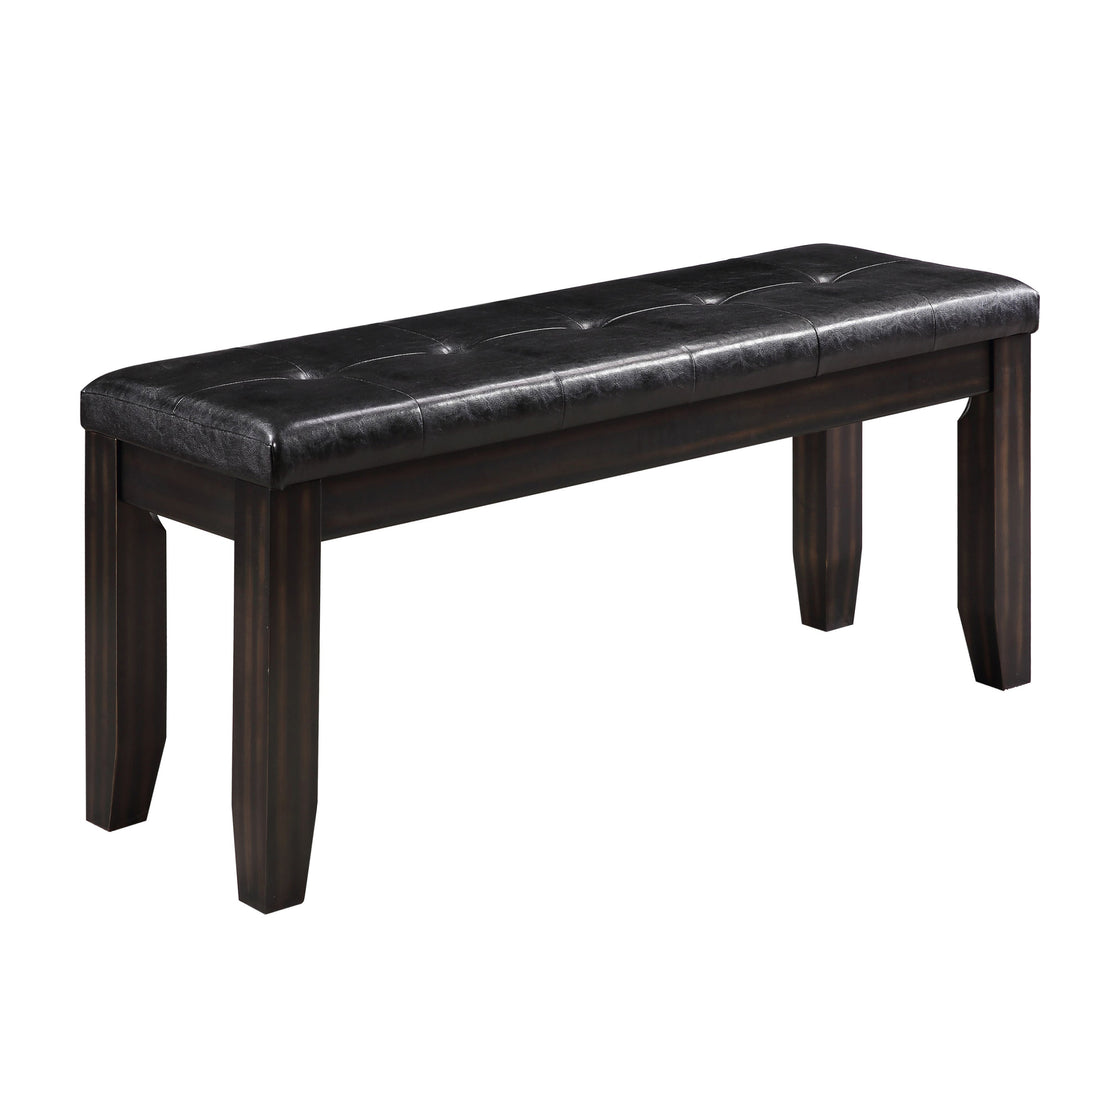 Black And Espresso Bench With Tufted Cushion -